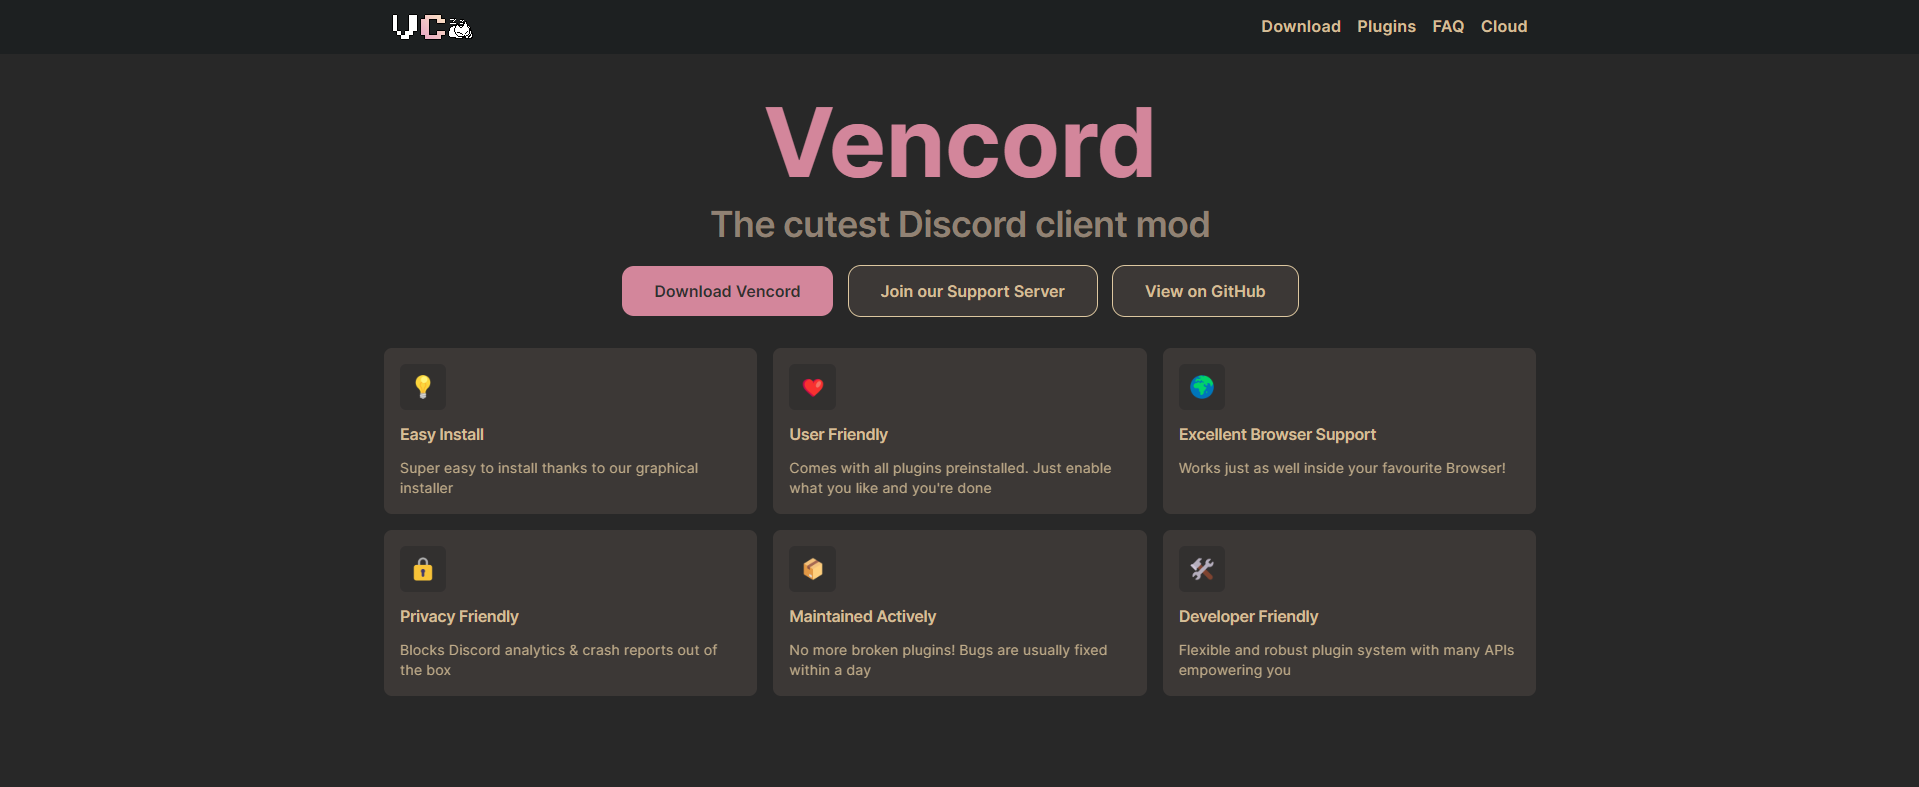 Vencord - Enhance your Discord server with powerful features and customizable bots for a better community experience.